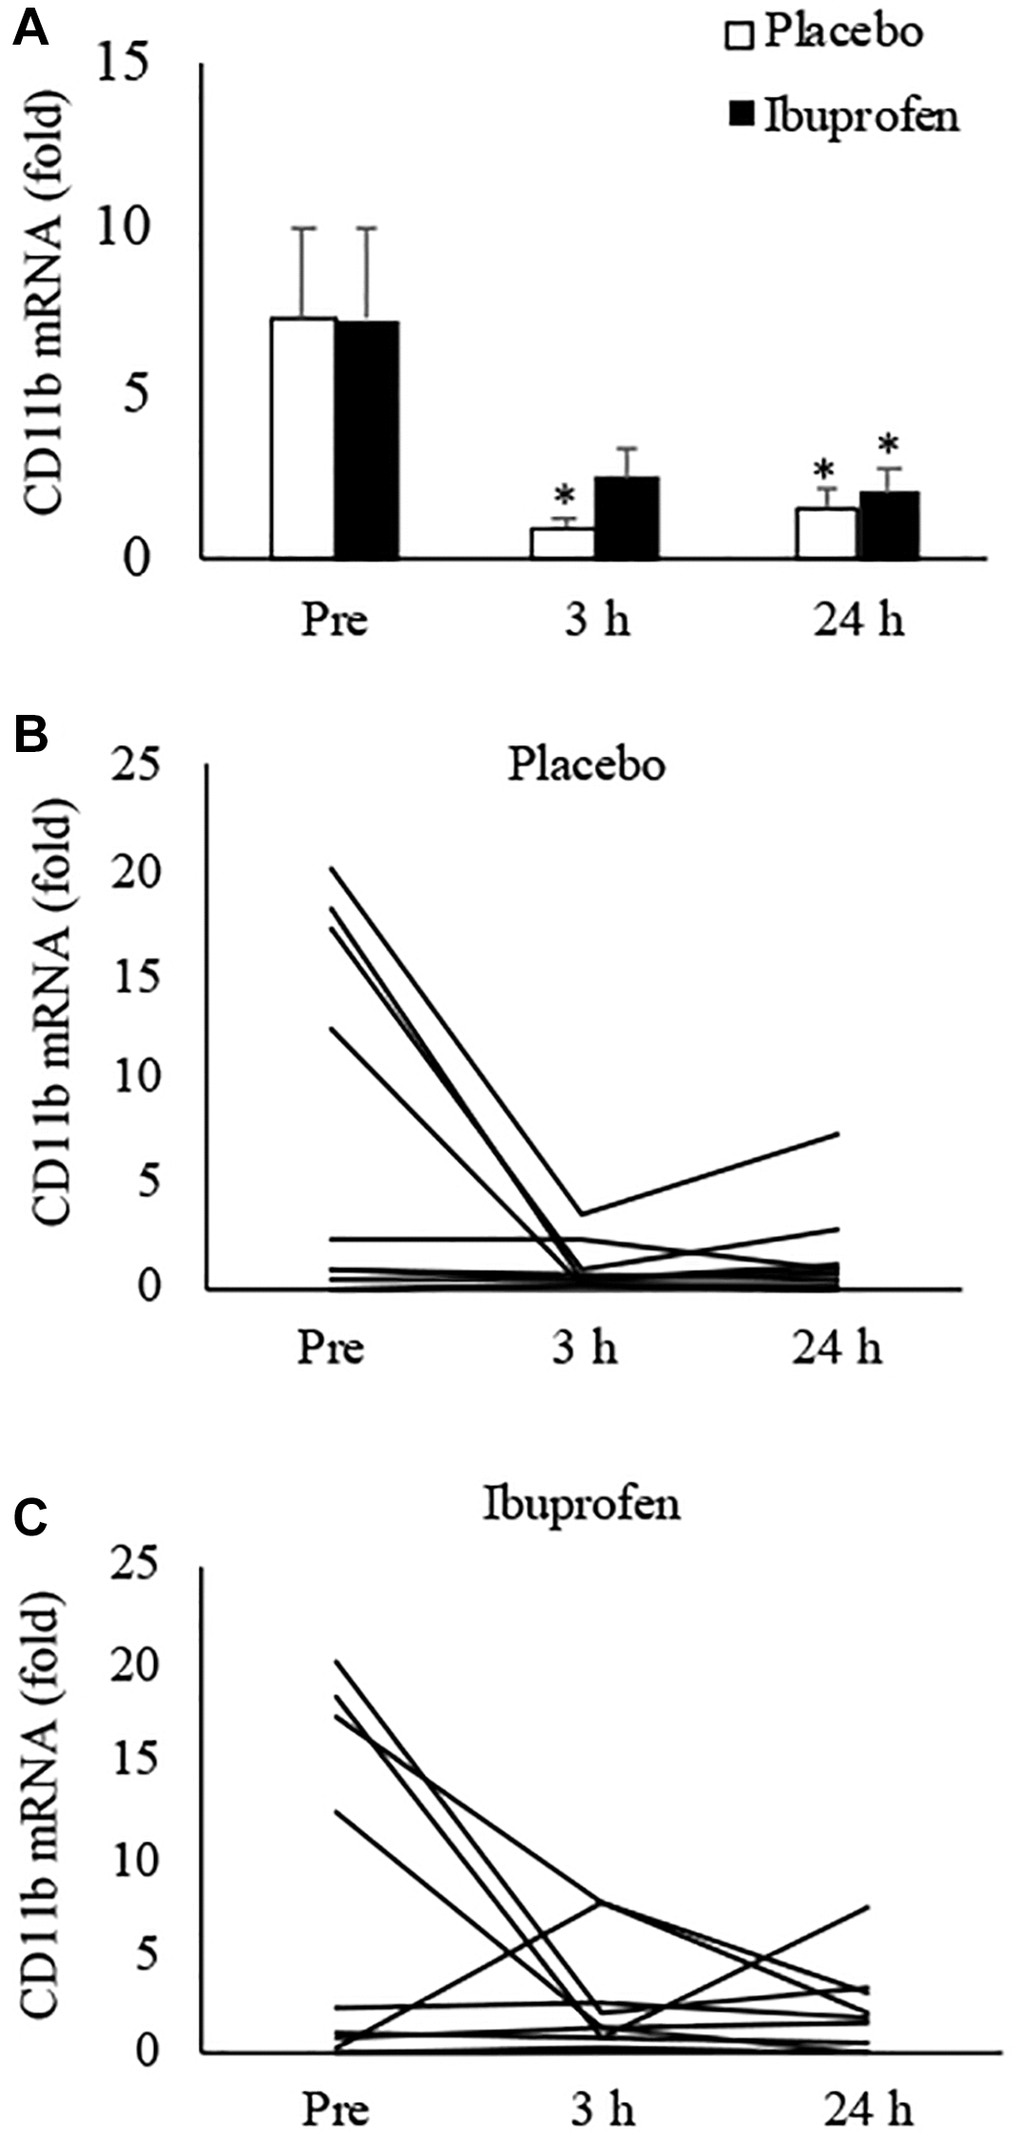 Effect of ibuprofen on CD11b expression in human skeletal muscle after HIIE. Decreased CD11b mRNA after HIIE was moderately attenuated by ibuprofen administration (A). A wide individual variation of the exercise response was observed for both placebo (B) and ibuprofen (C) trials. †Denotes significant difference against placebo, p *denotes significant difference against Pre, p 